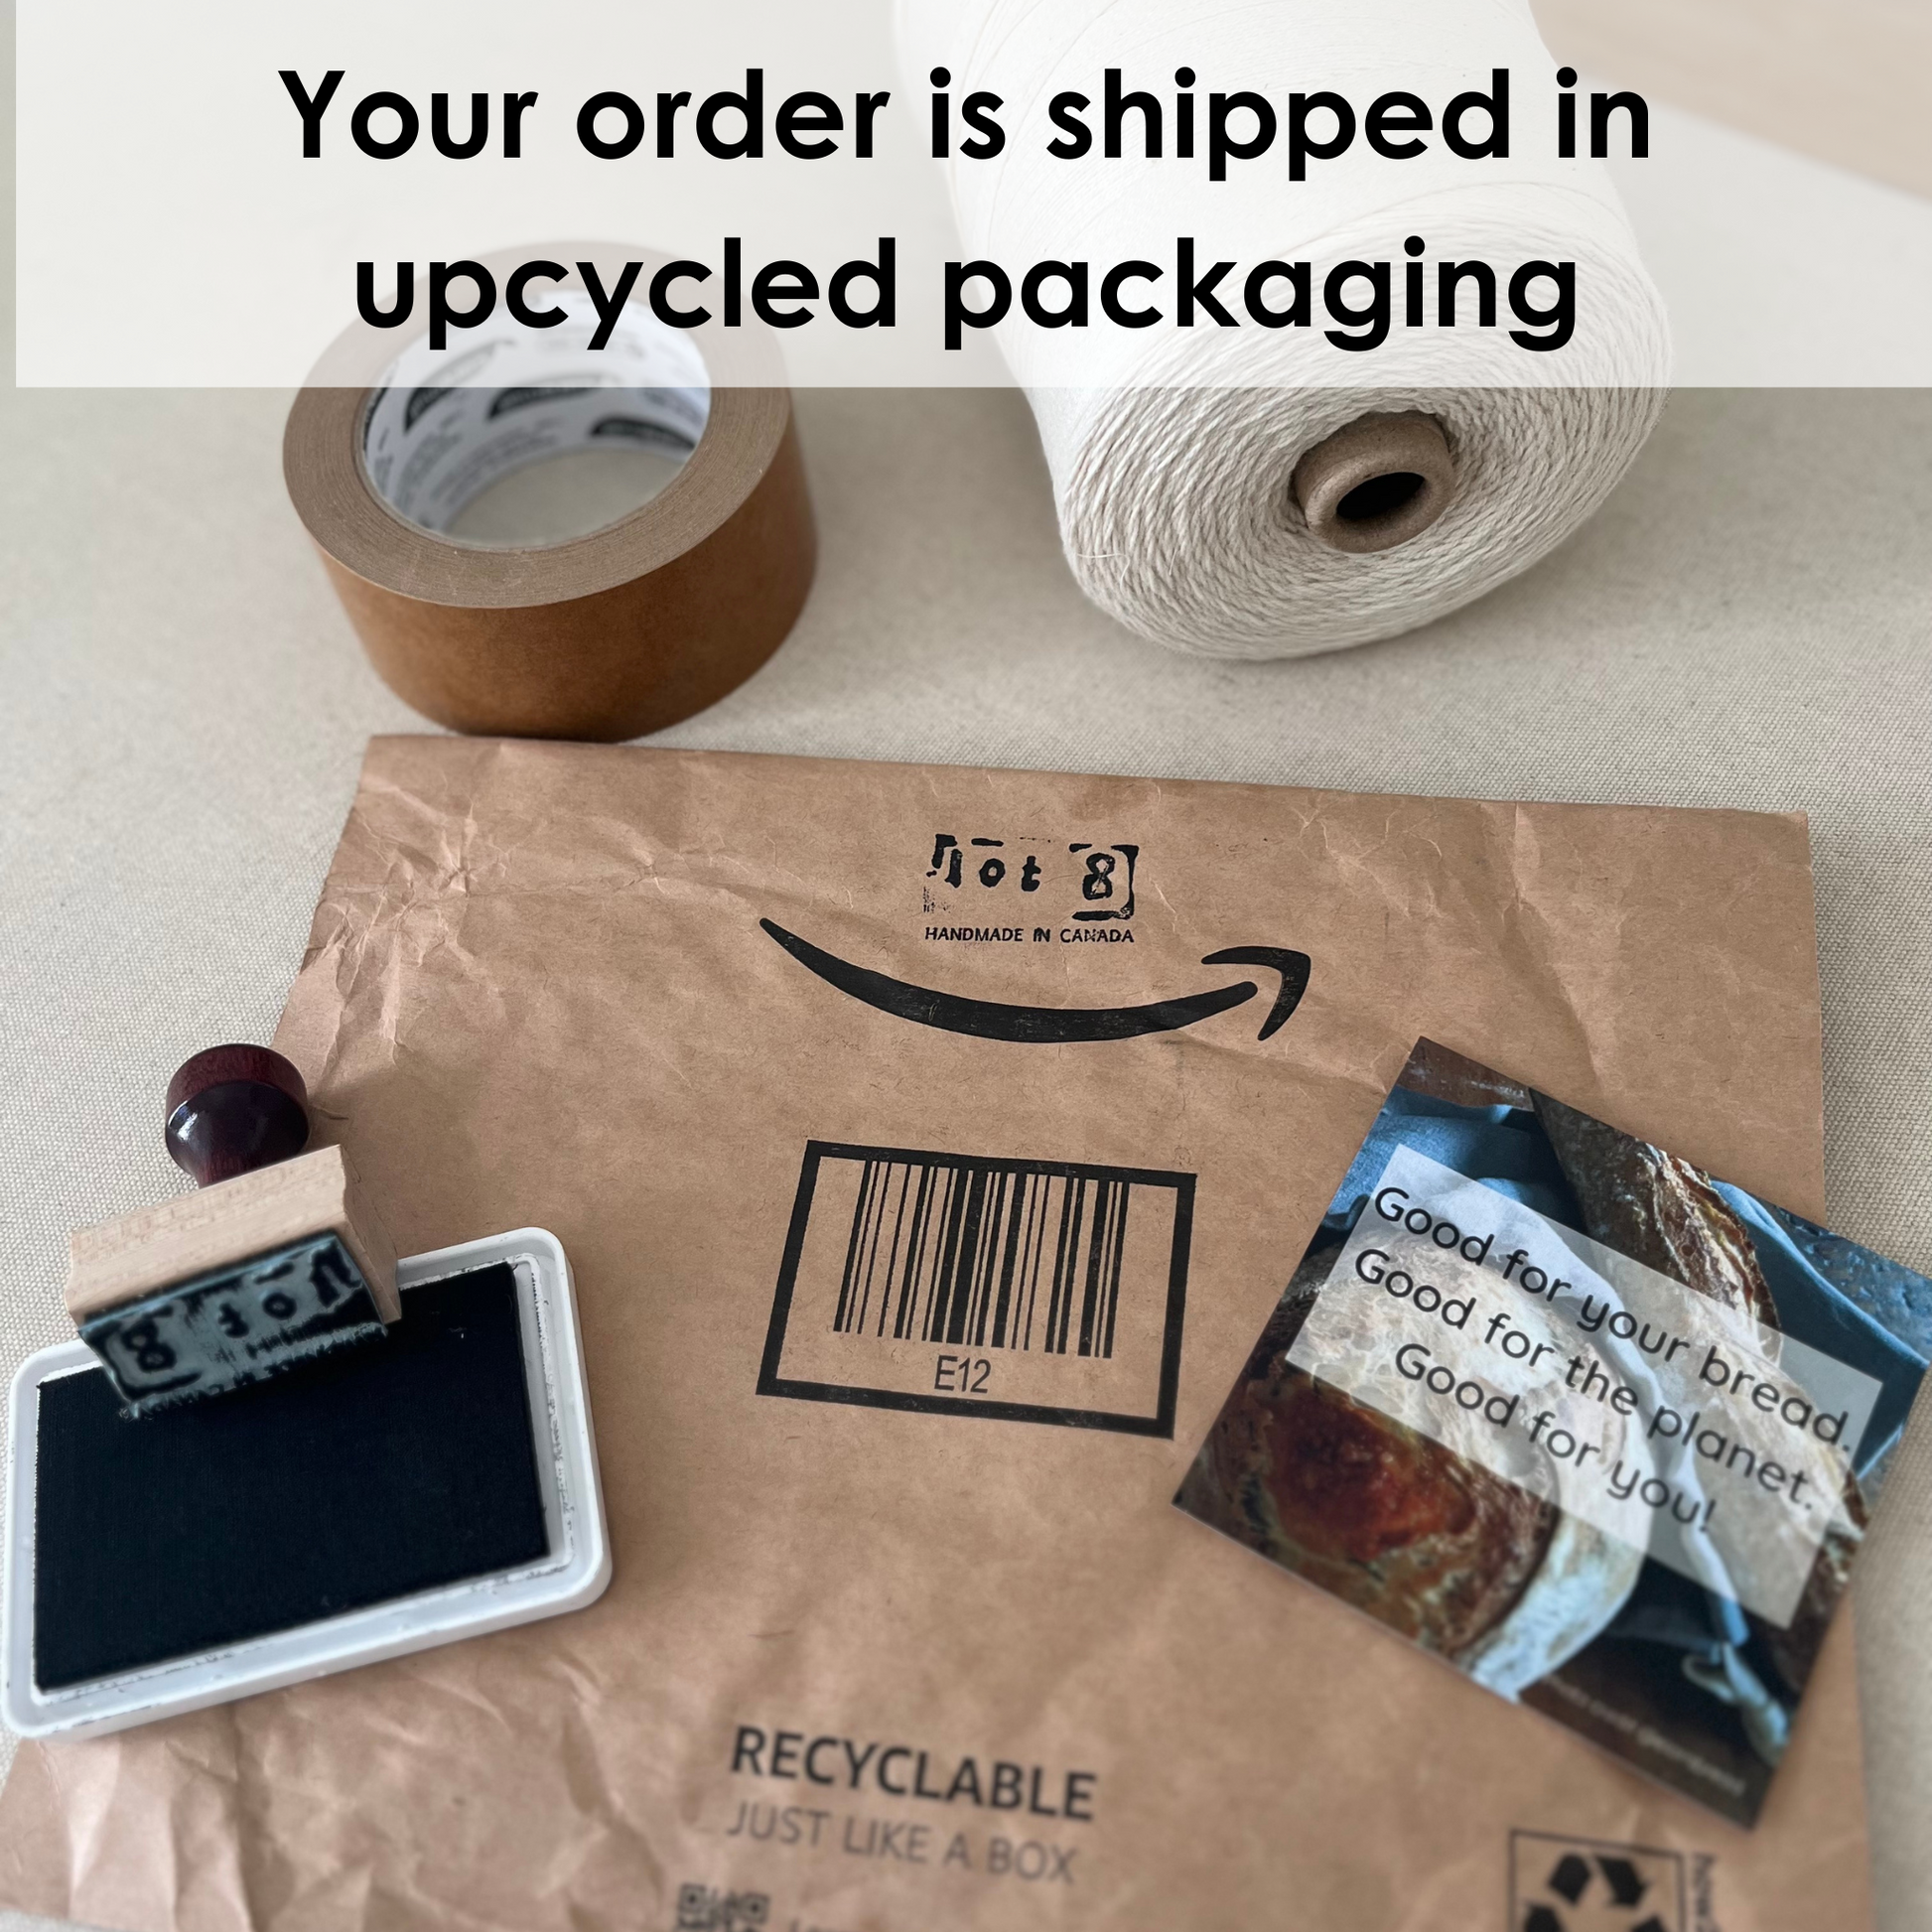 Your order is shipped in upcycled packaging. Pictured is a gently used kraft paper mailer alongside eco-friendly packing tape, cotton twine and a lot8 thank you card.